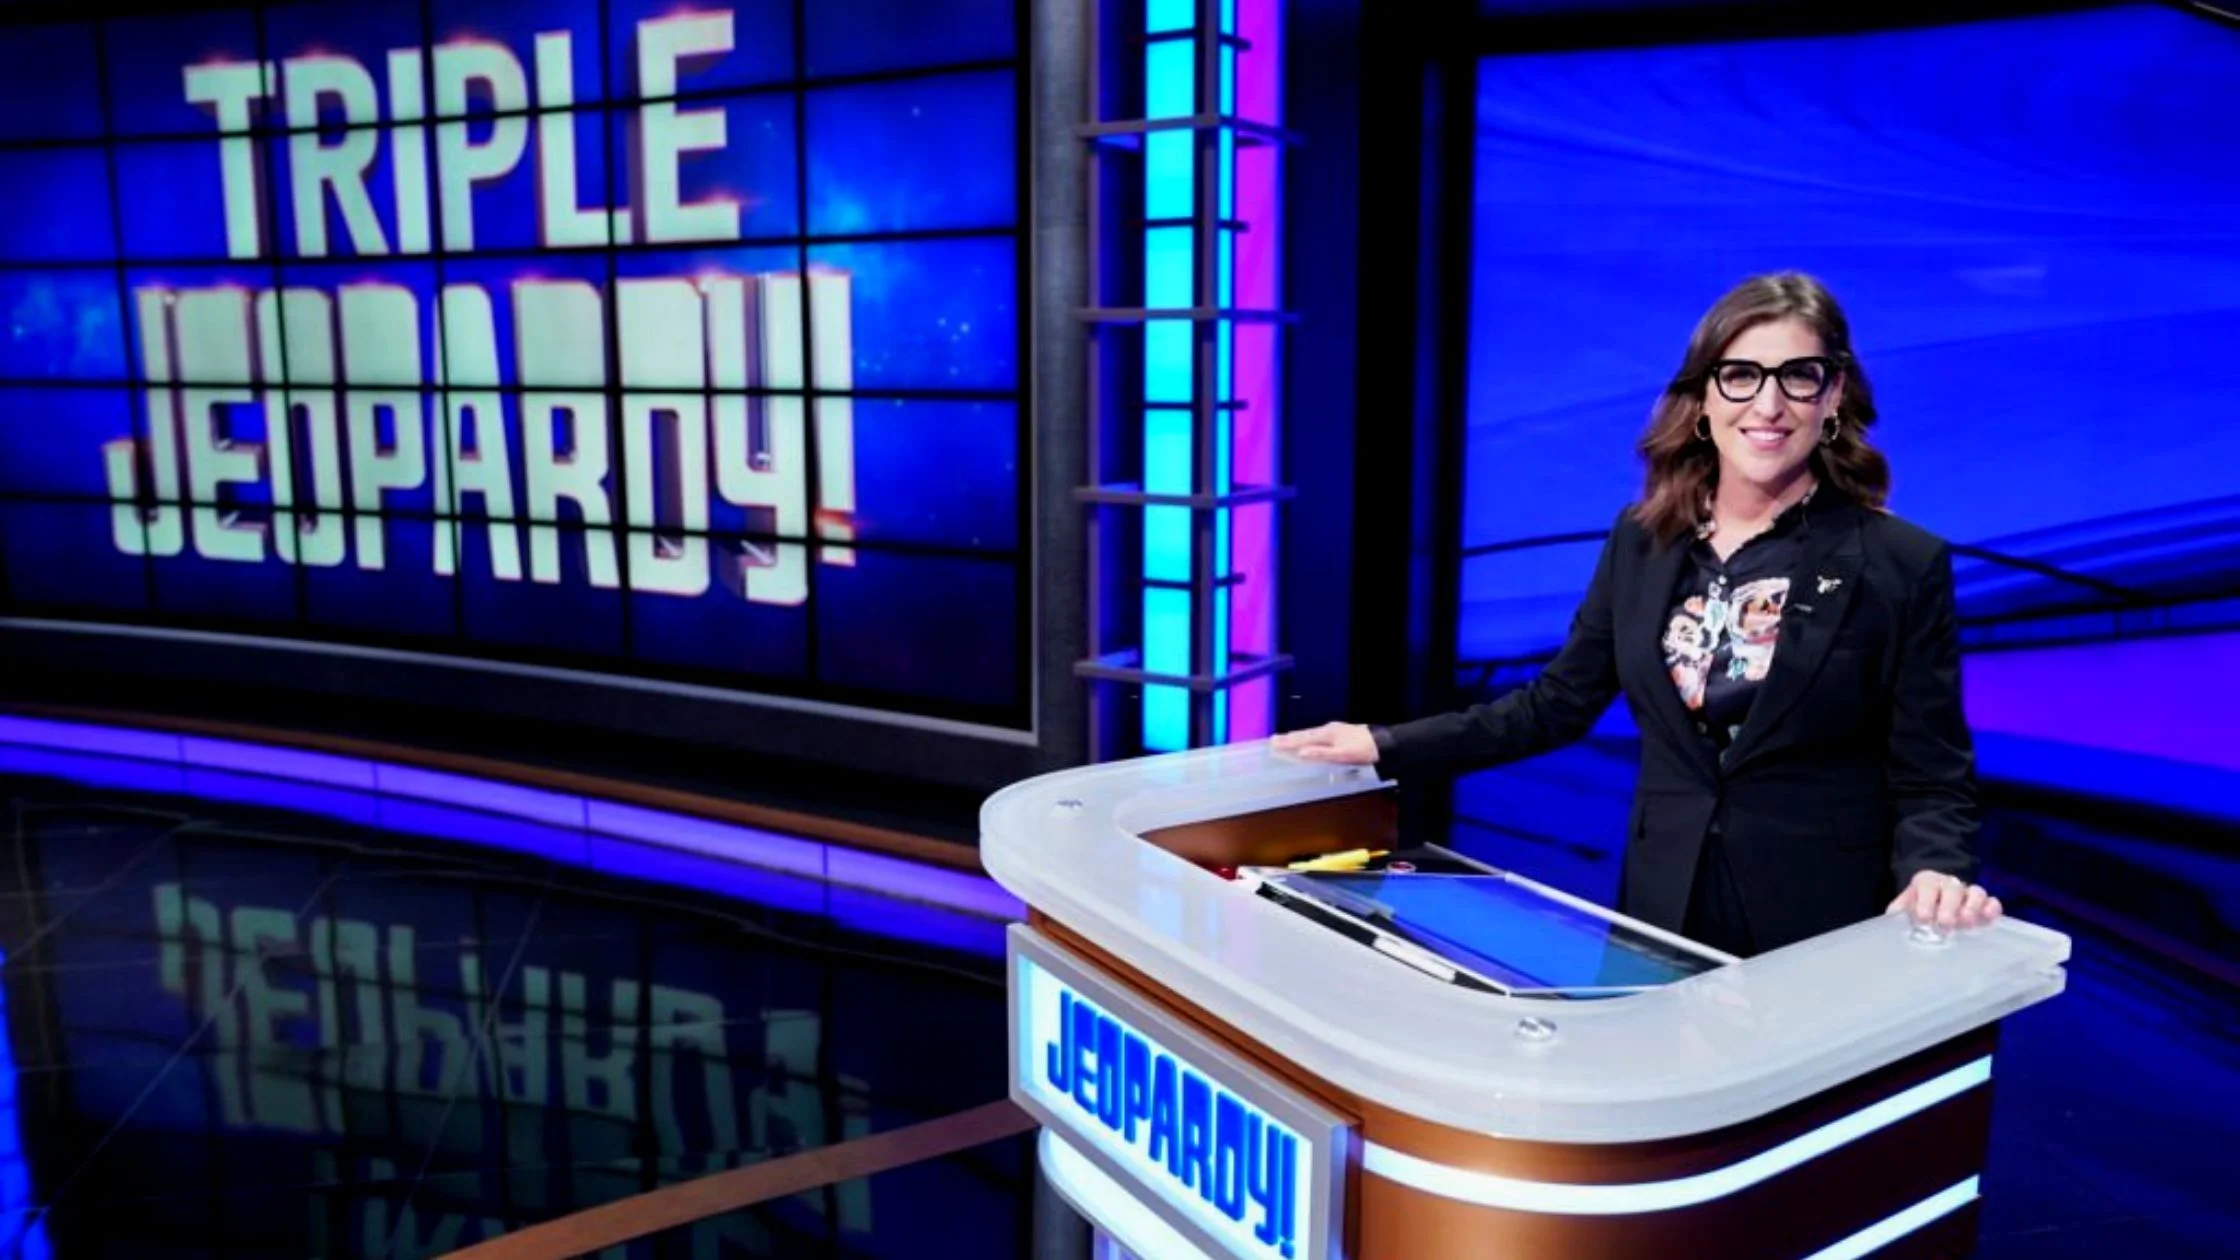 Celebrity Jeopardy: Who Won? Season 1’s Climax? Which Jeopardy Question Was The Last One?